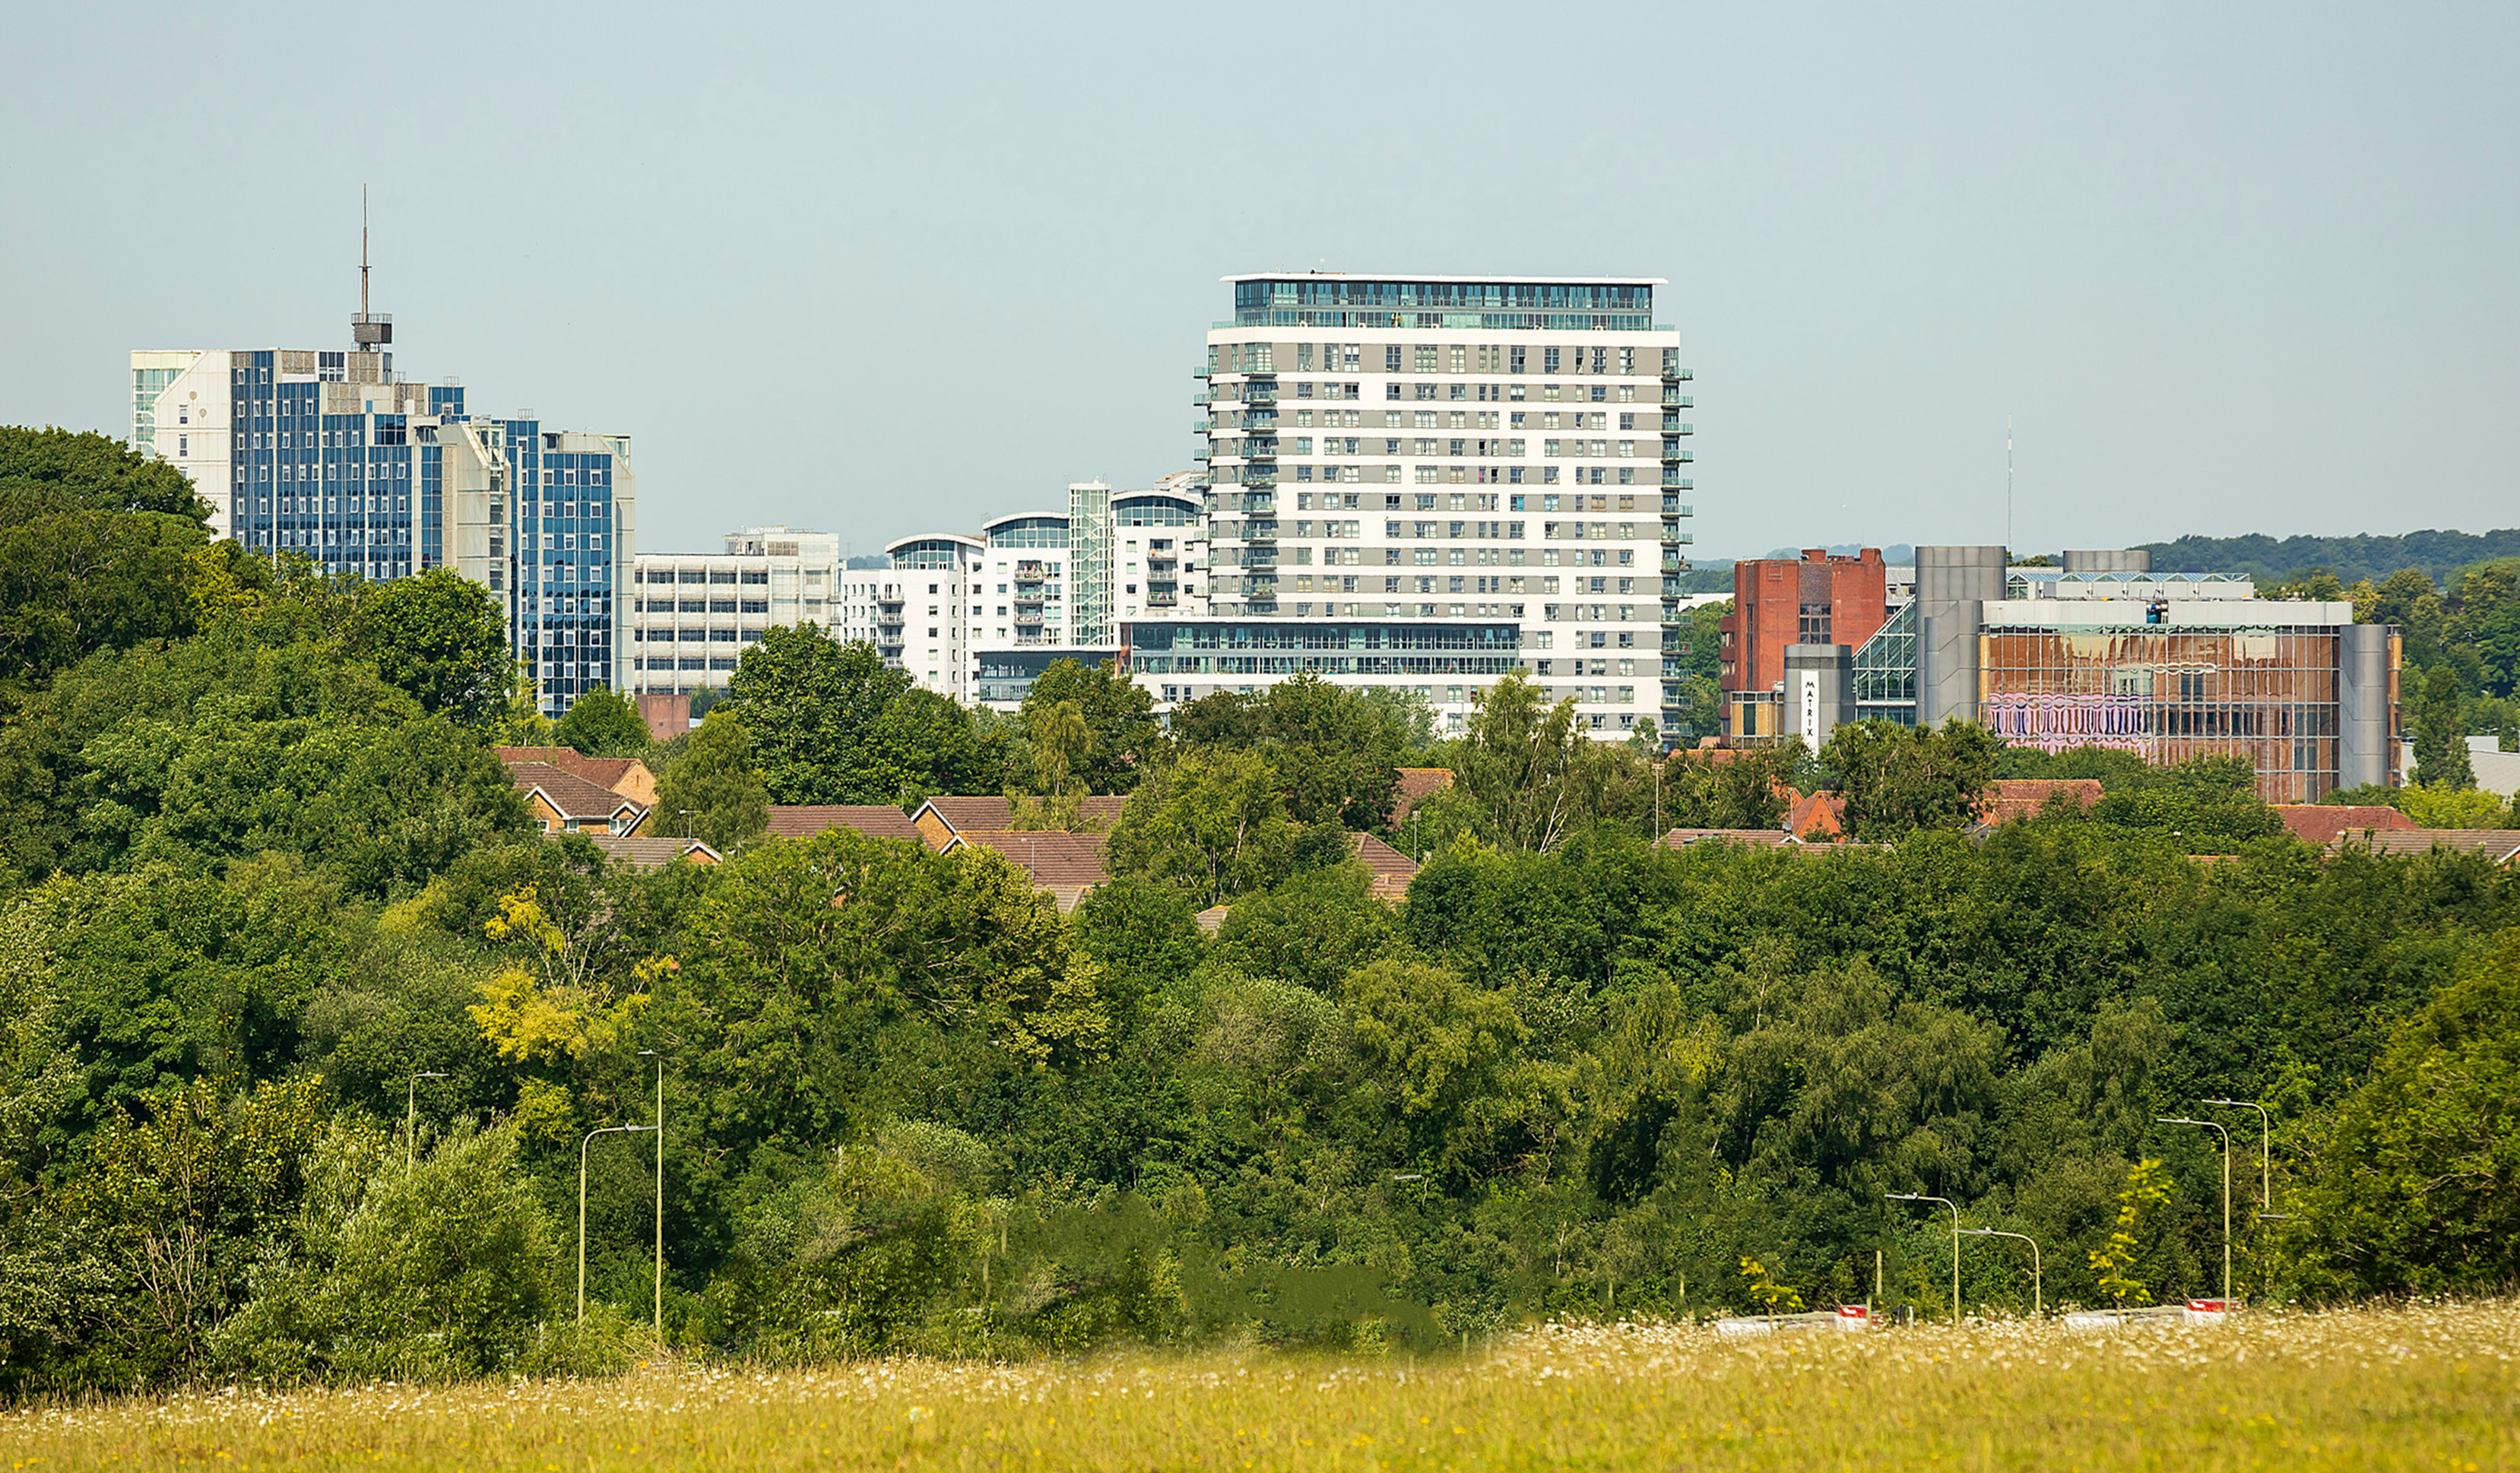 The tall buildings of Basingstoke town centre can be seen from Crabtree Plantation.